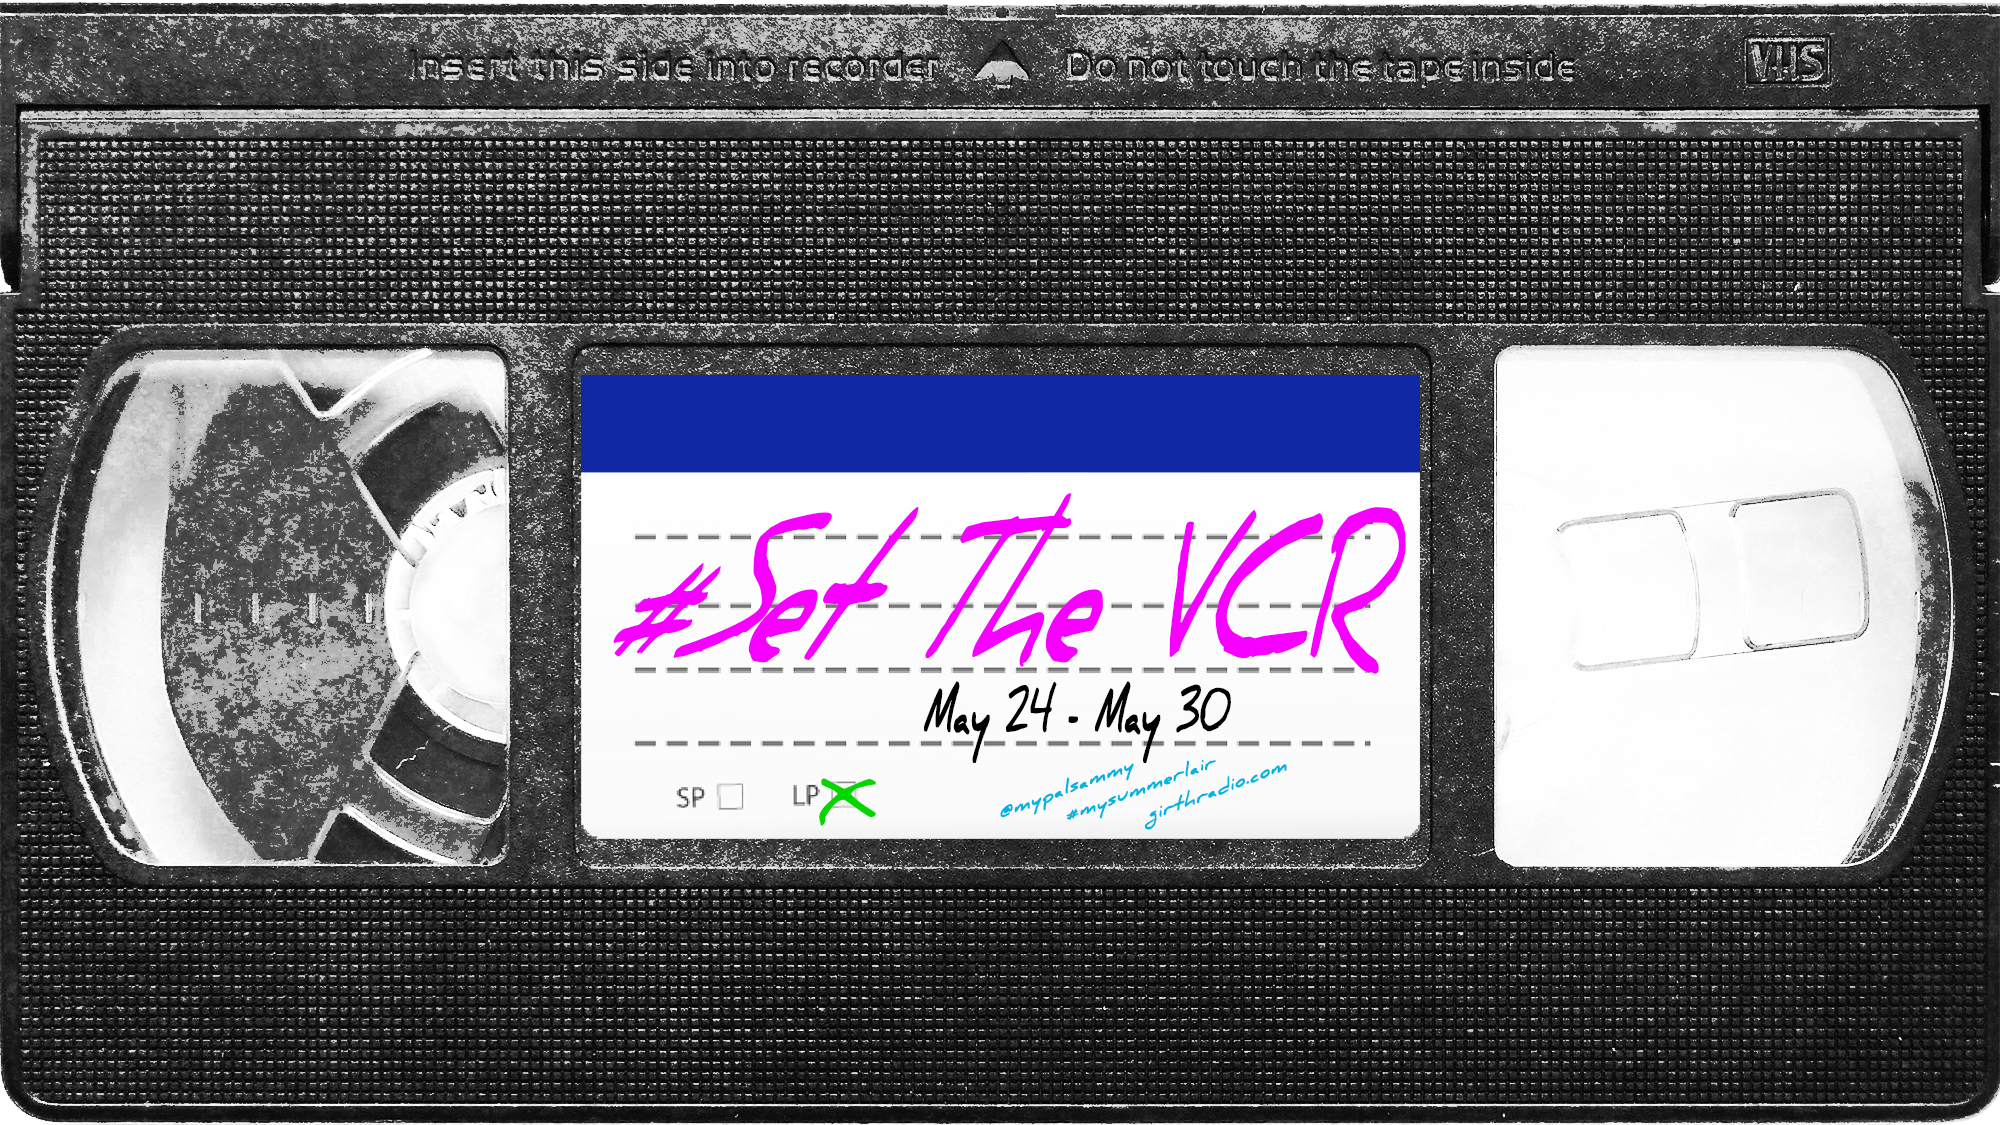 #SetTheVCR: May 24-30, 2020